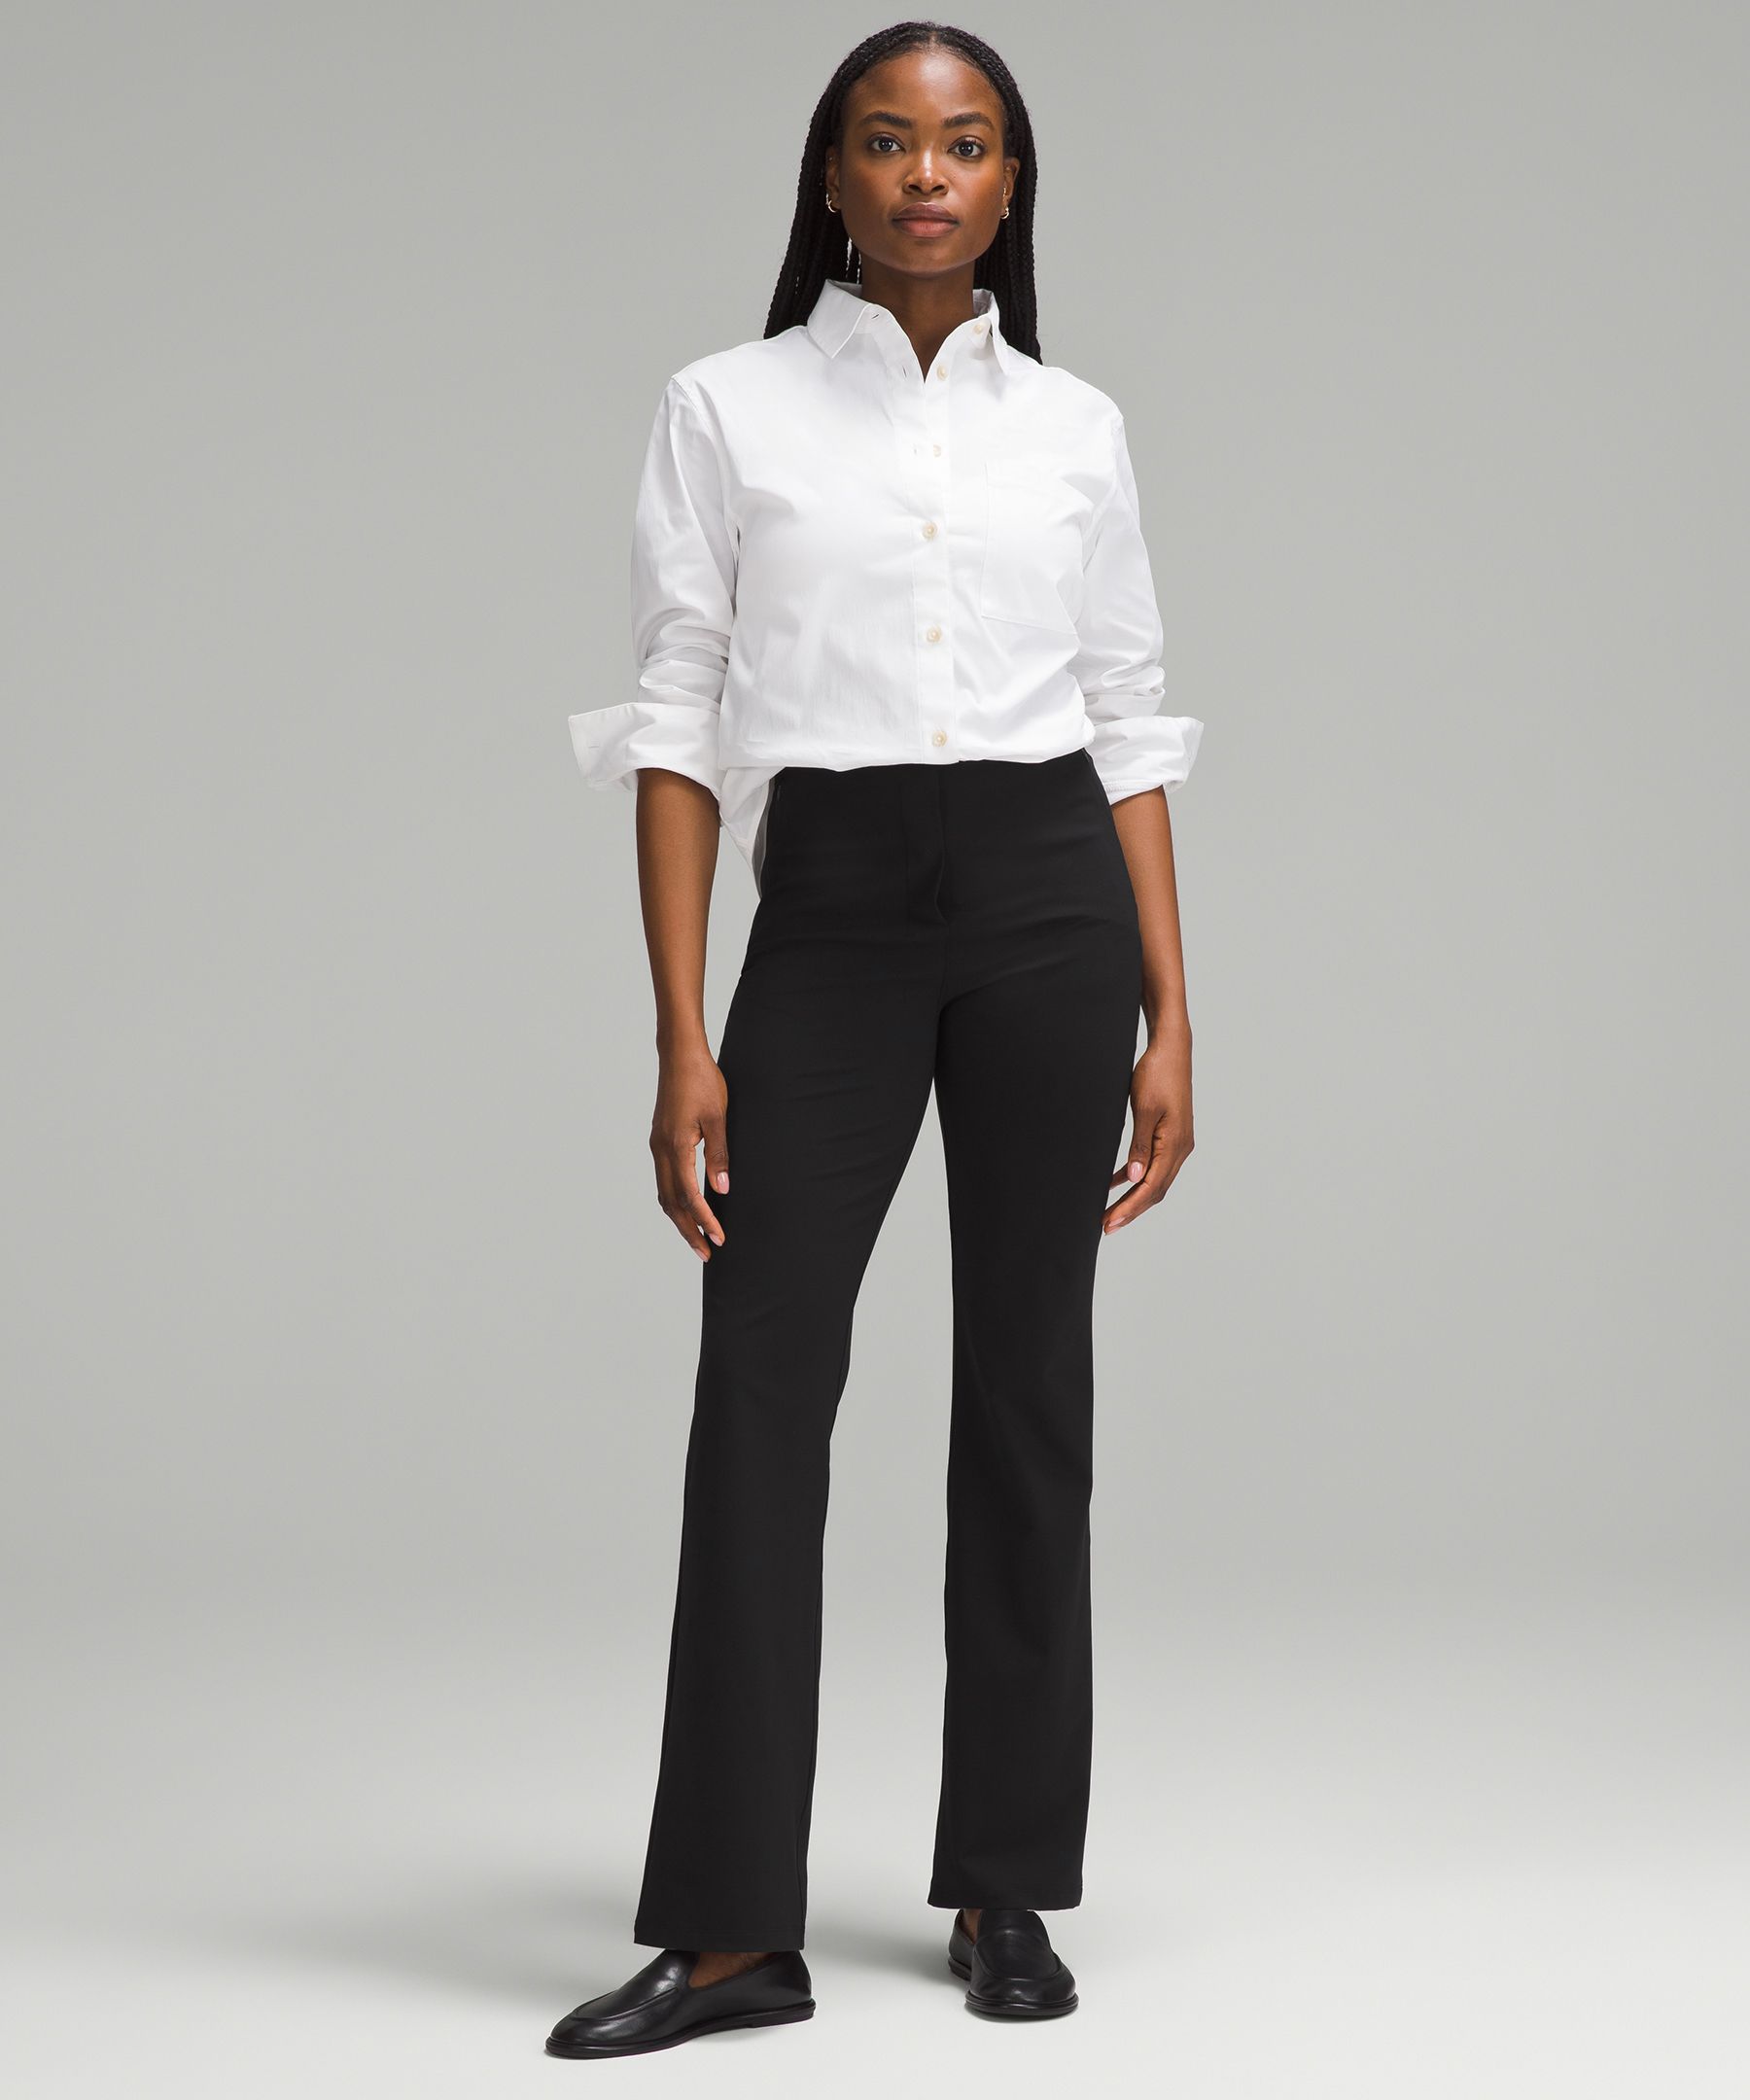 Women's Tall Pull-on Pant